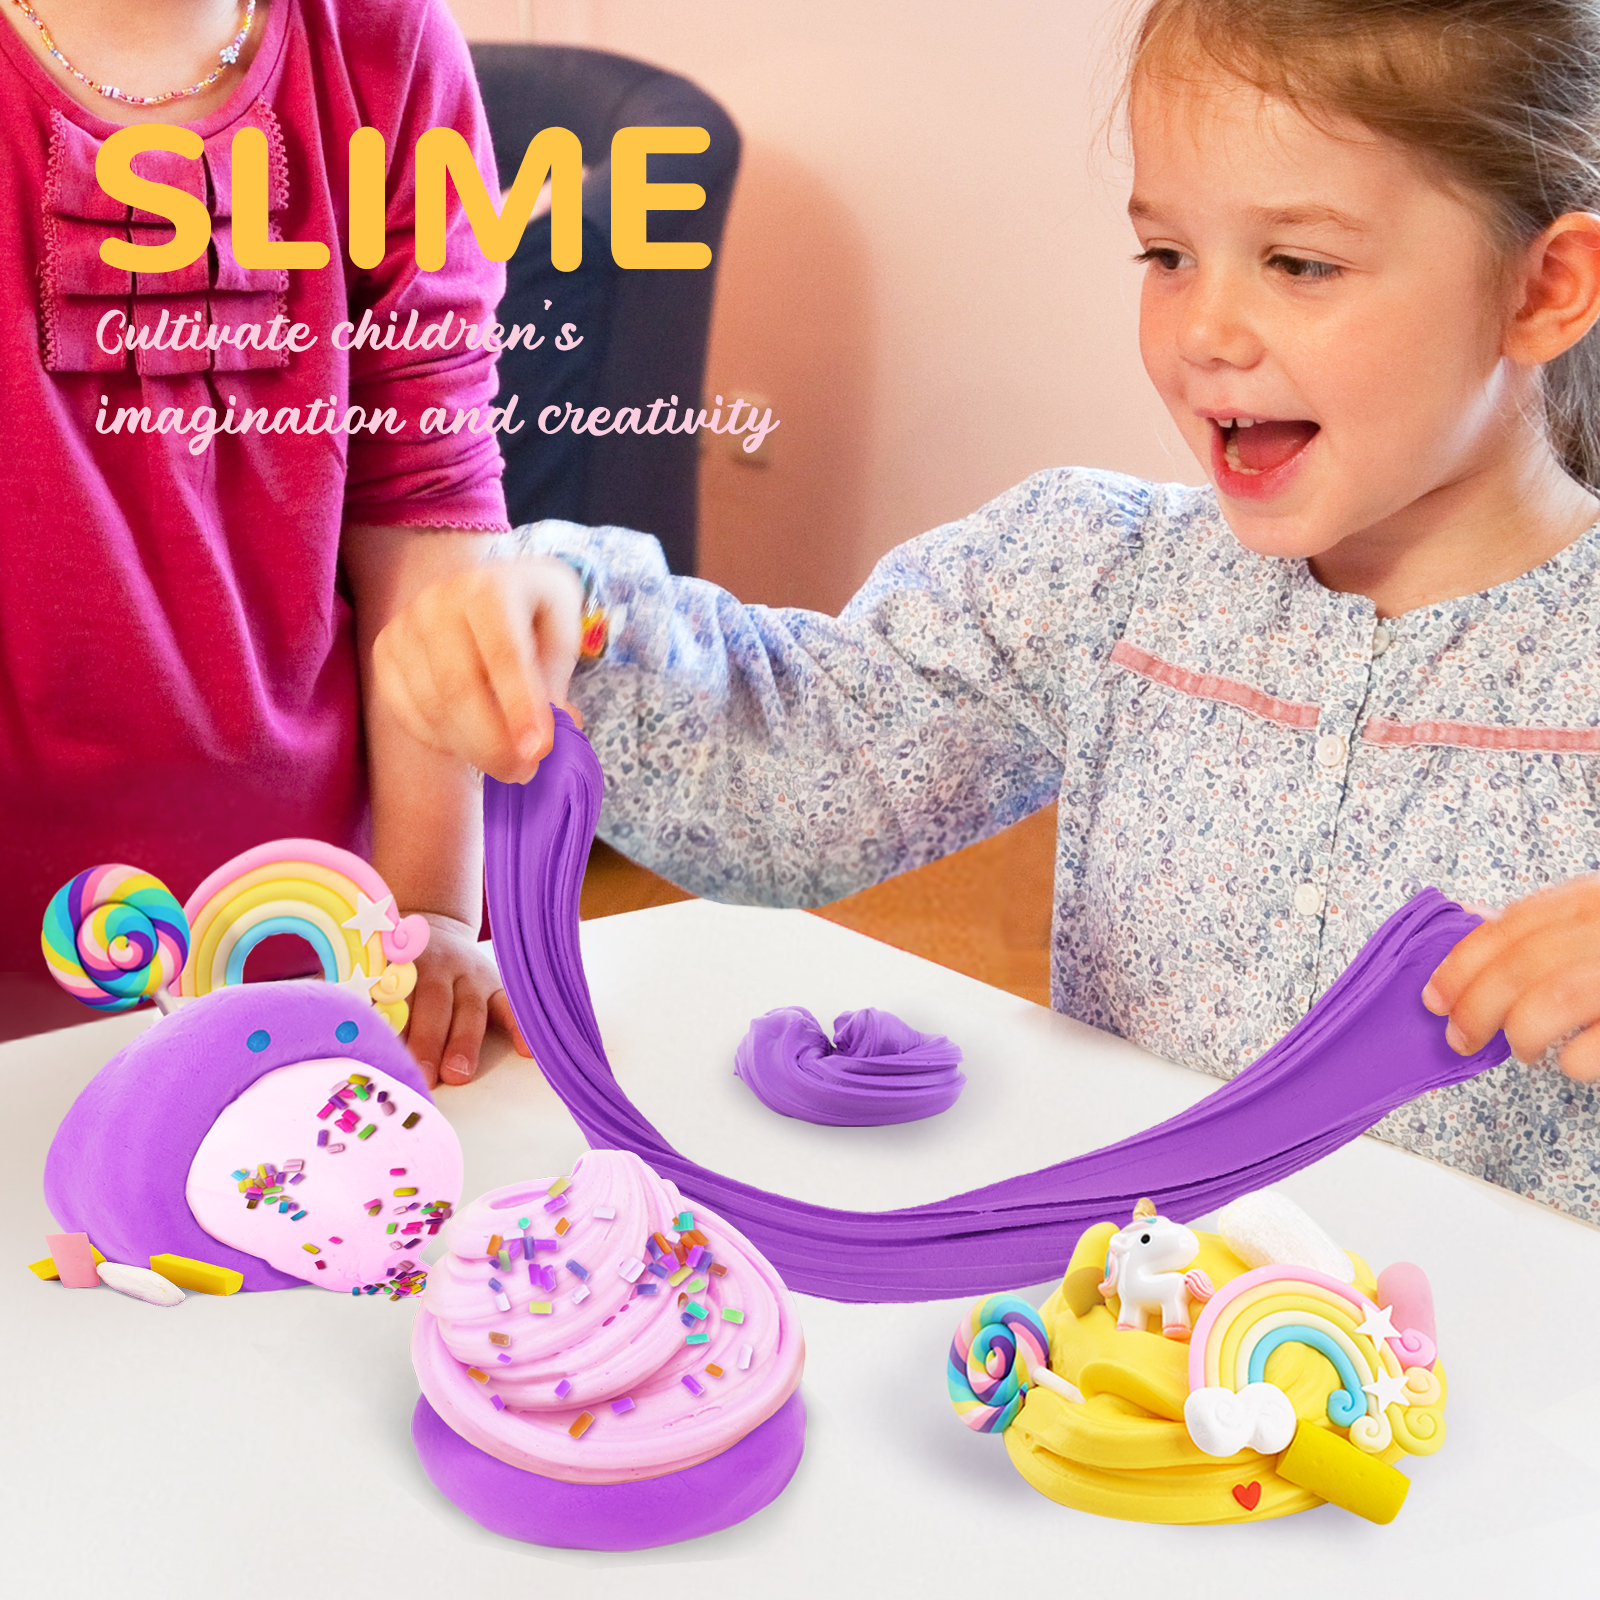 Dream Fun Slime Kits for 6 7 8 9 10 Year Old Girls Putty Slimes Set for 5 6 7 8 9 11 Years Old Kids Birthday Gifts Present Fluffy Slime Toys for Children Age 8 Years - image 4 of 7